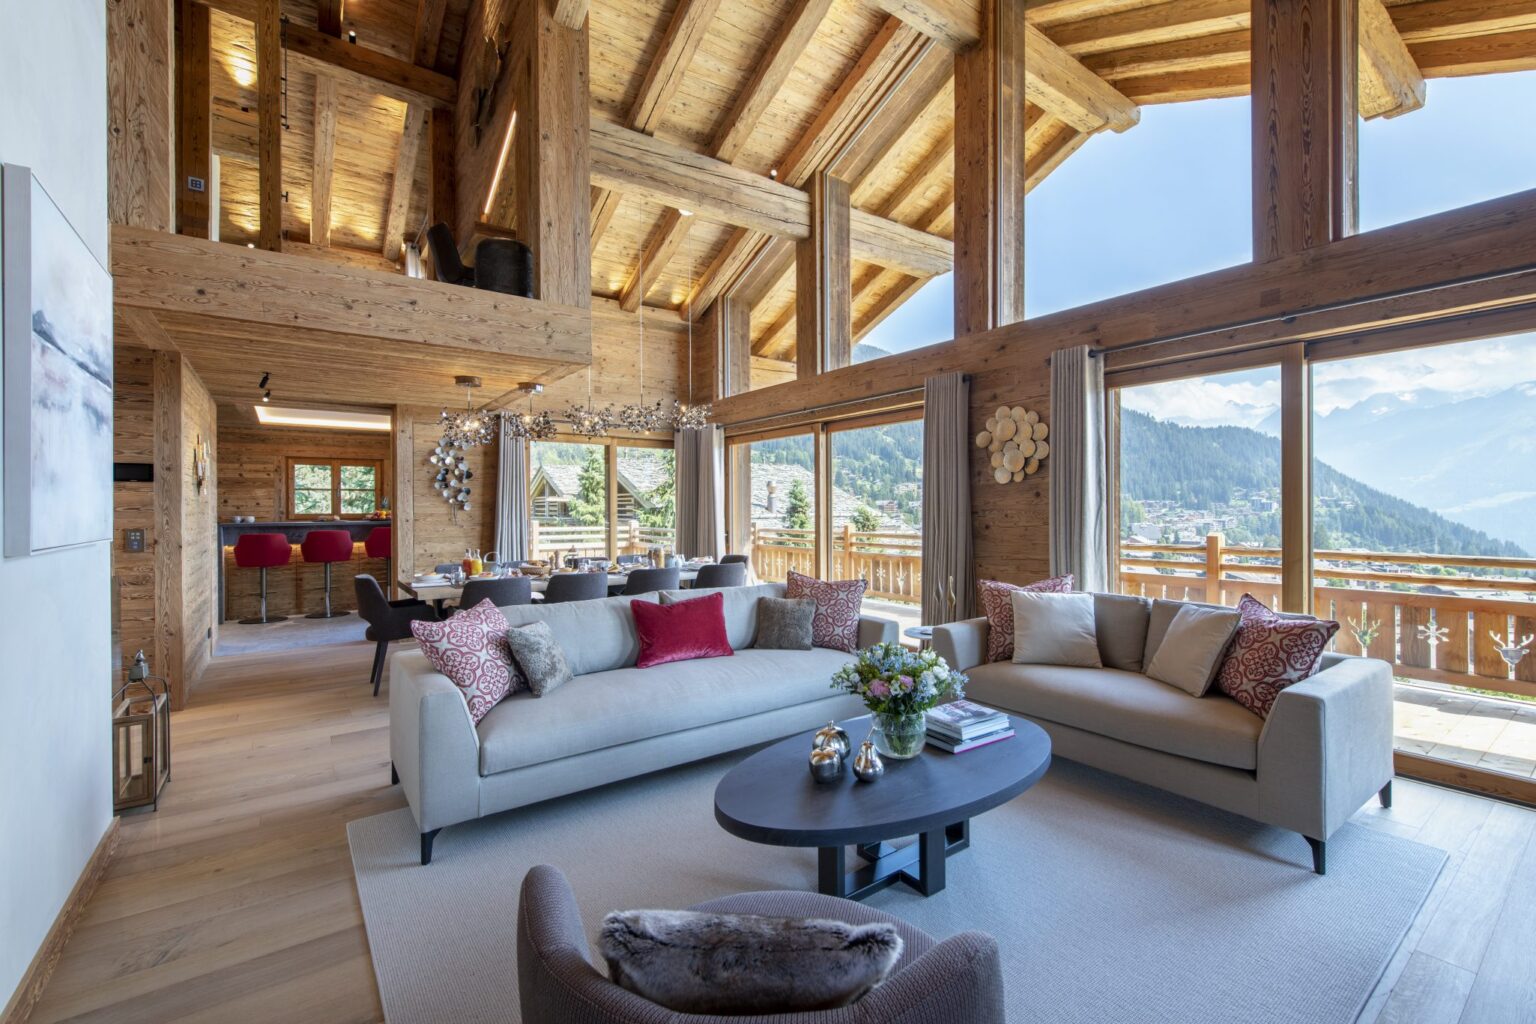 Chalet Northrock|||||||||||||||||||||||||booking a luxury ski holiday|||||